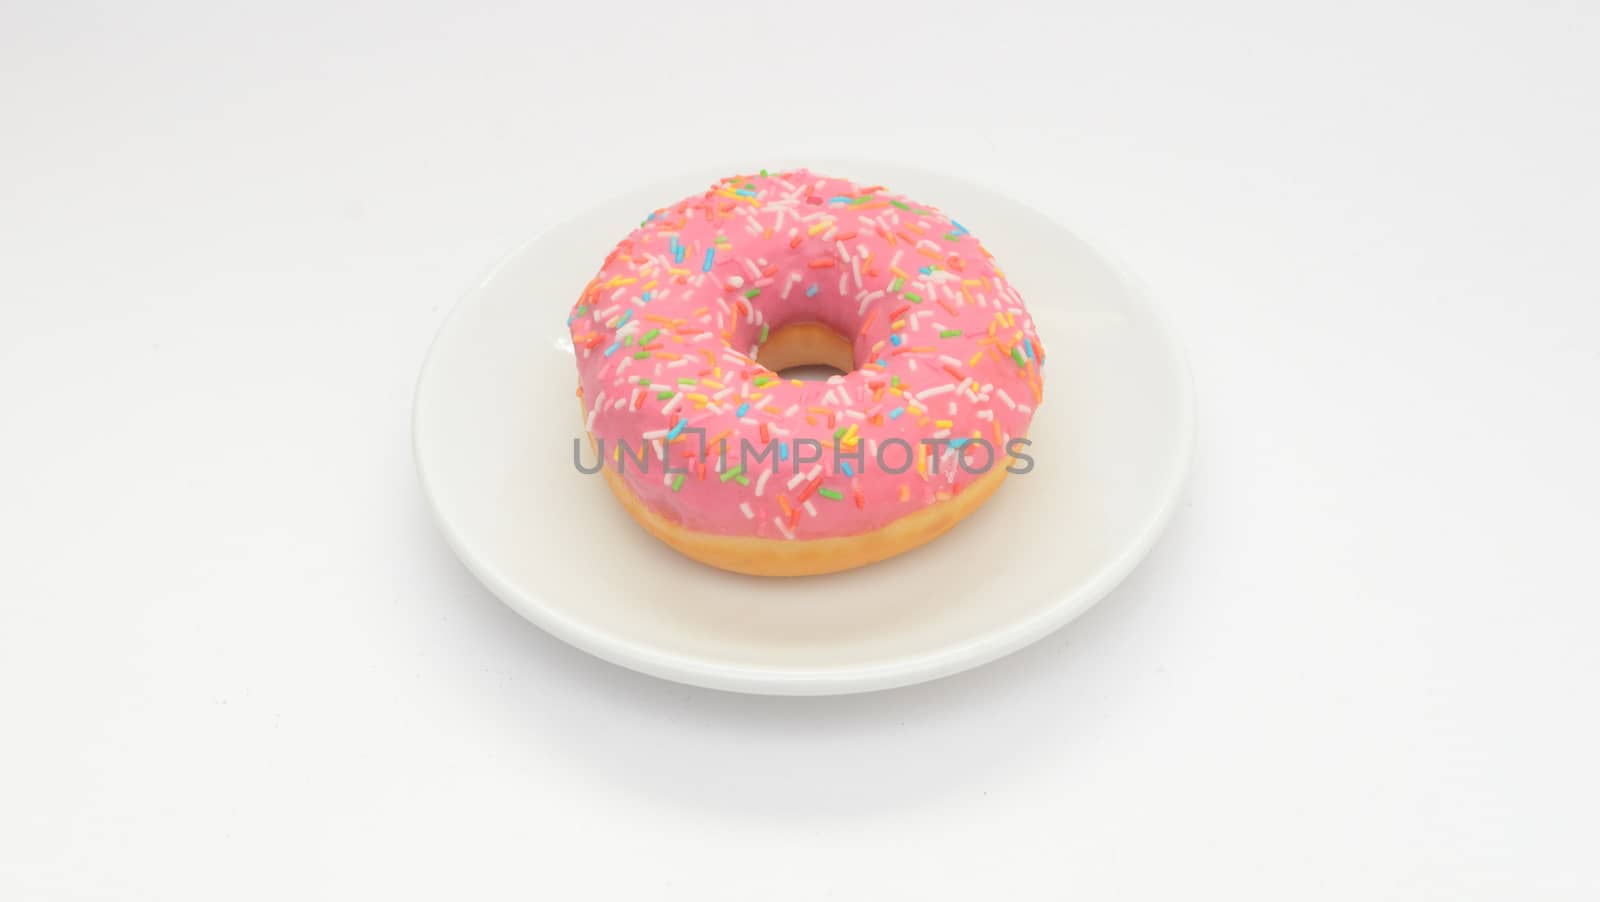 One pink glazed donut on plate on white background.Sweet dessert food for snack by andre_dechapelle